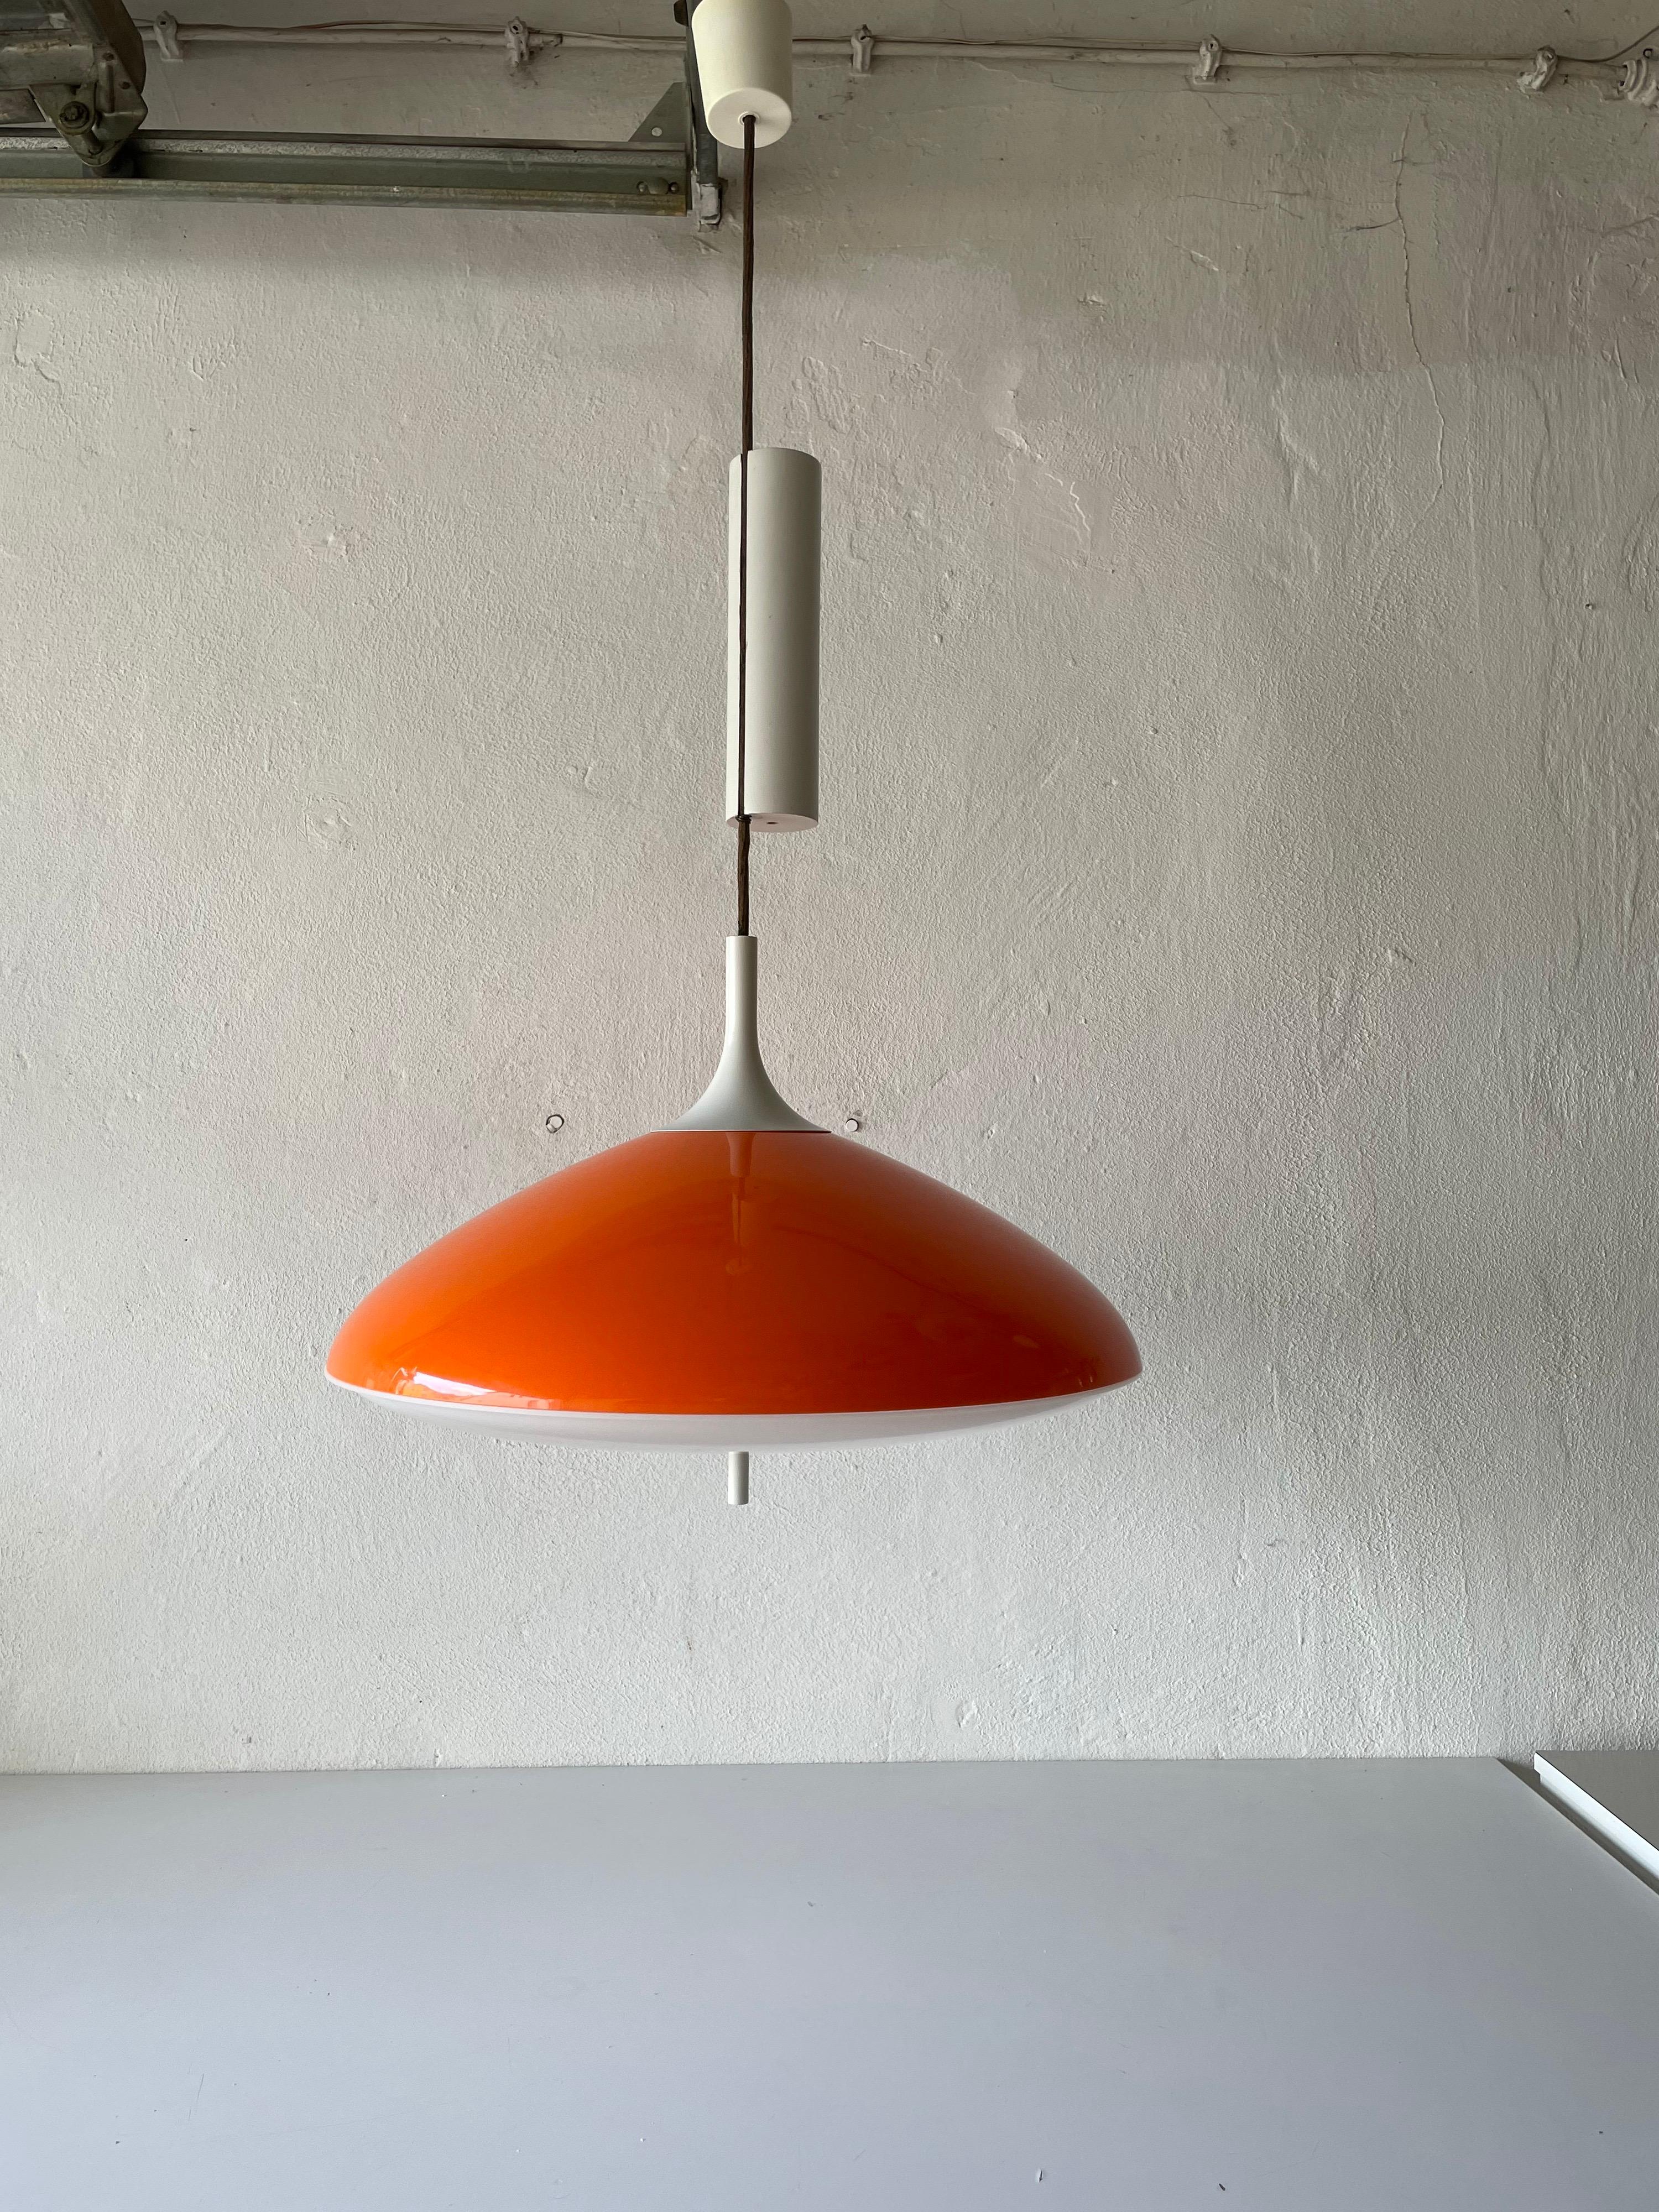 Pop art large orange ceiling lamp by Temde, 1960s, Switzerland

Lampshade is in very good vintage condition.
Part on the middle made of wood

This lamp works with E27 light bulb. Max 100W
Wired and suitable to use with 220V and 110V for all